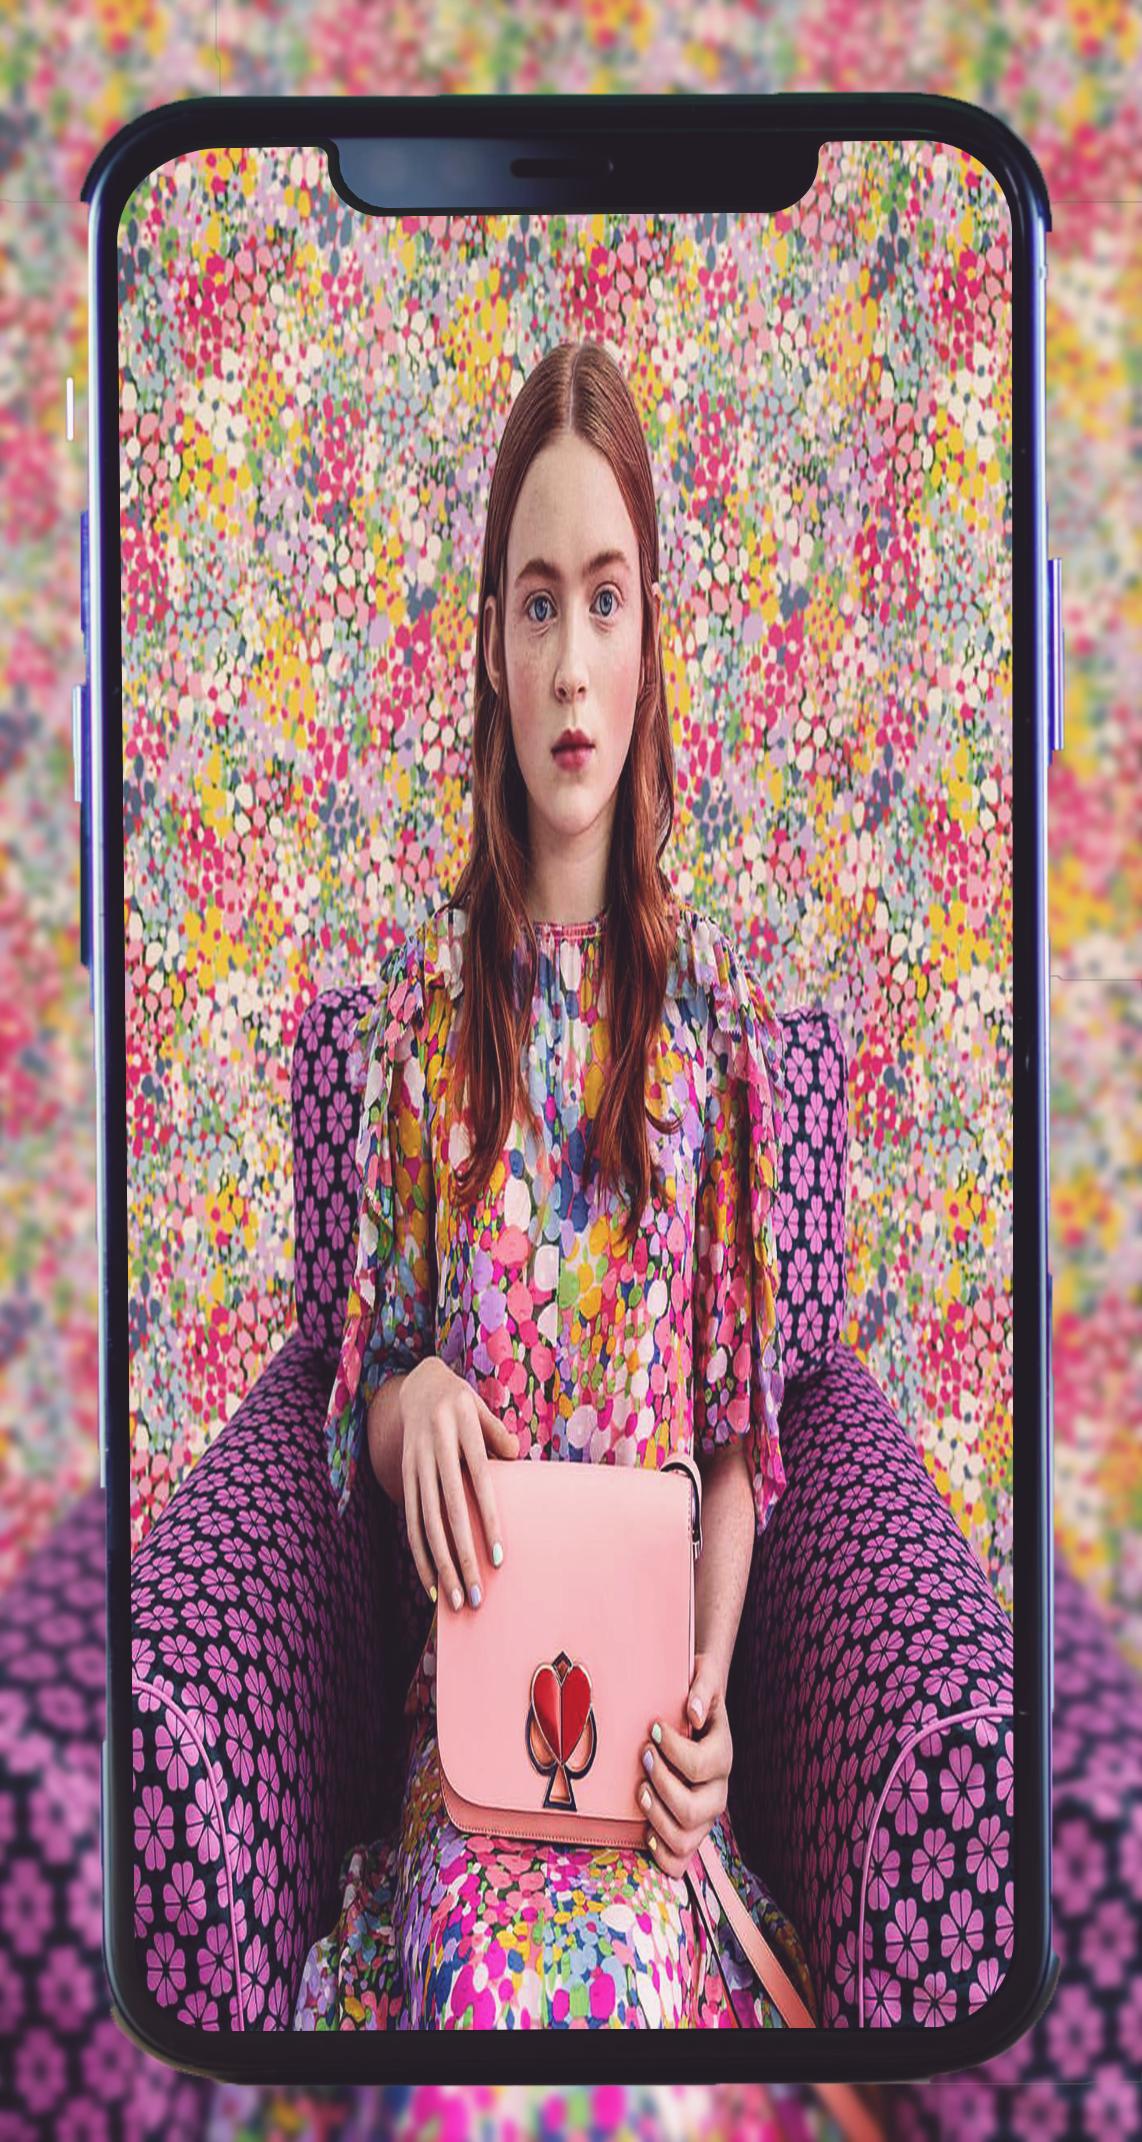 Sadie Sink Wallpaper 21 For Android Apk Download